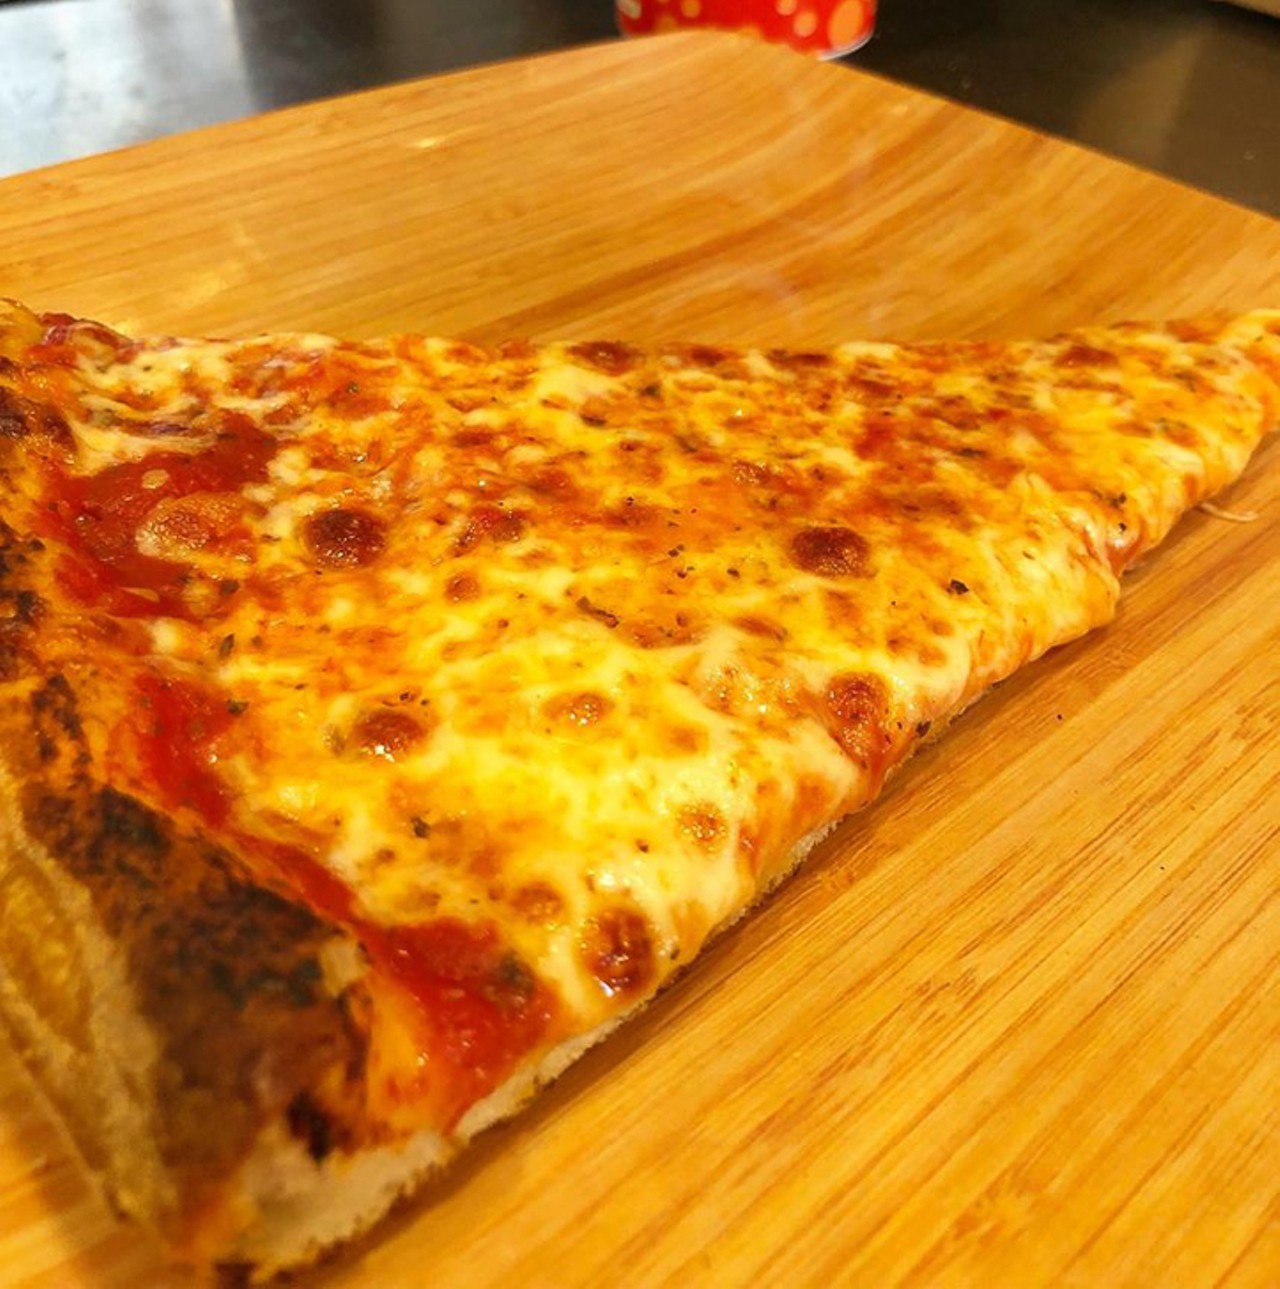 Gino&#146;s NY Style Pizza
727-789-6883. 3394 Tampa Rd., Palm Harbor. ginosnystylepizzeria.com  
Takeout and delivery. Two slices and a drink for $6. Curbside pickup available.
Photo via Gino&#146;s NY Style Pizza/Facebook